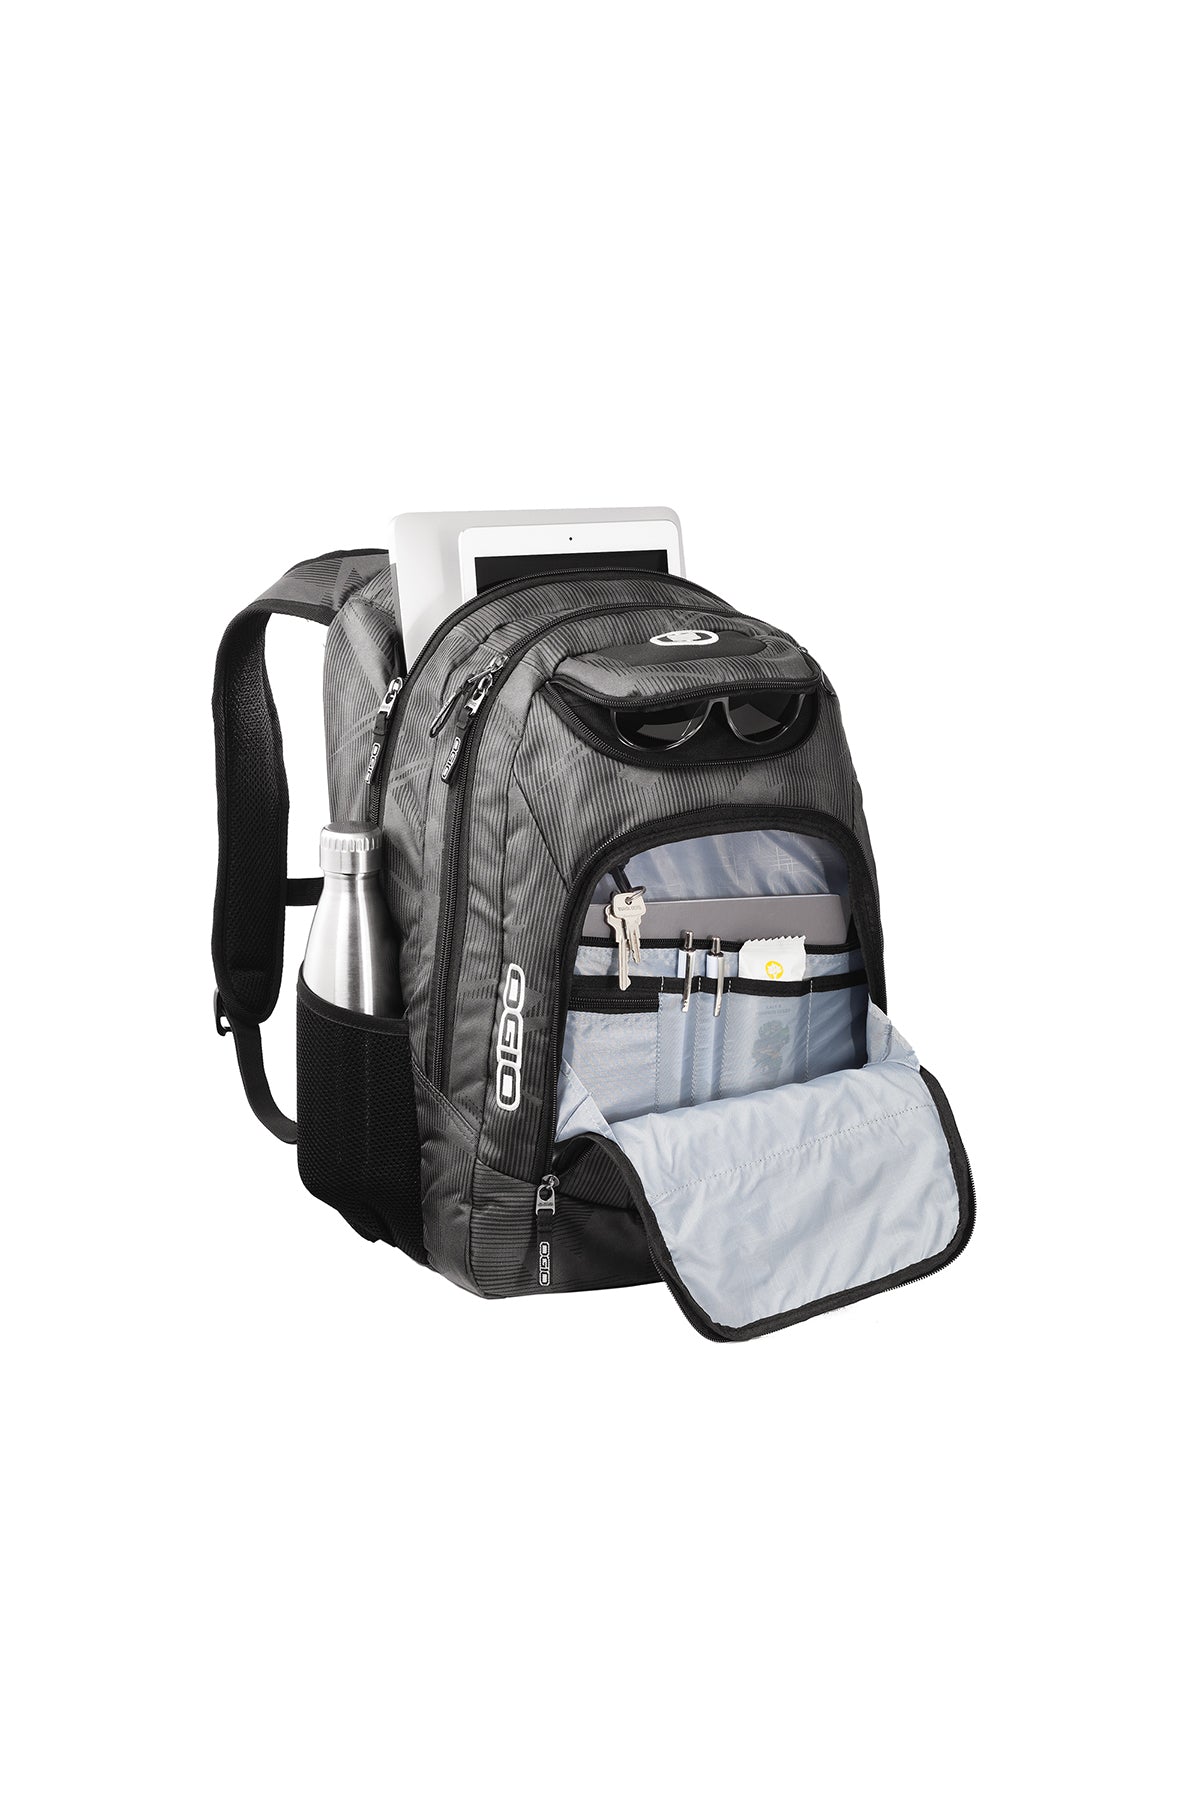 OGIO Excelsior Customzied Backpacks, Race Day/ Silver